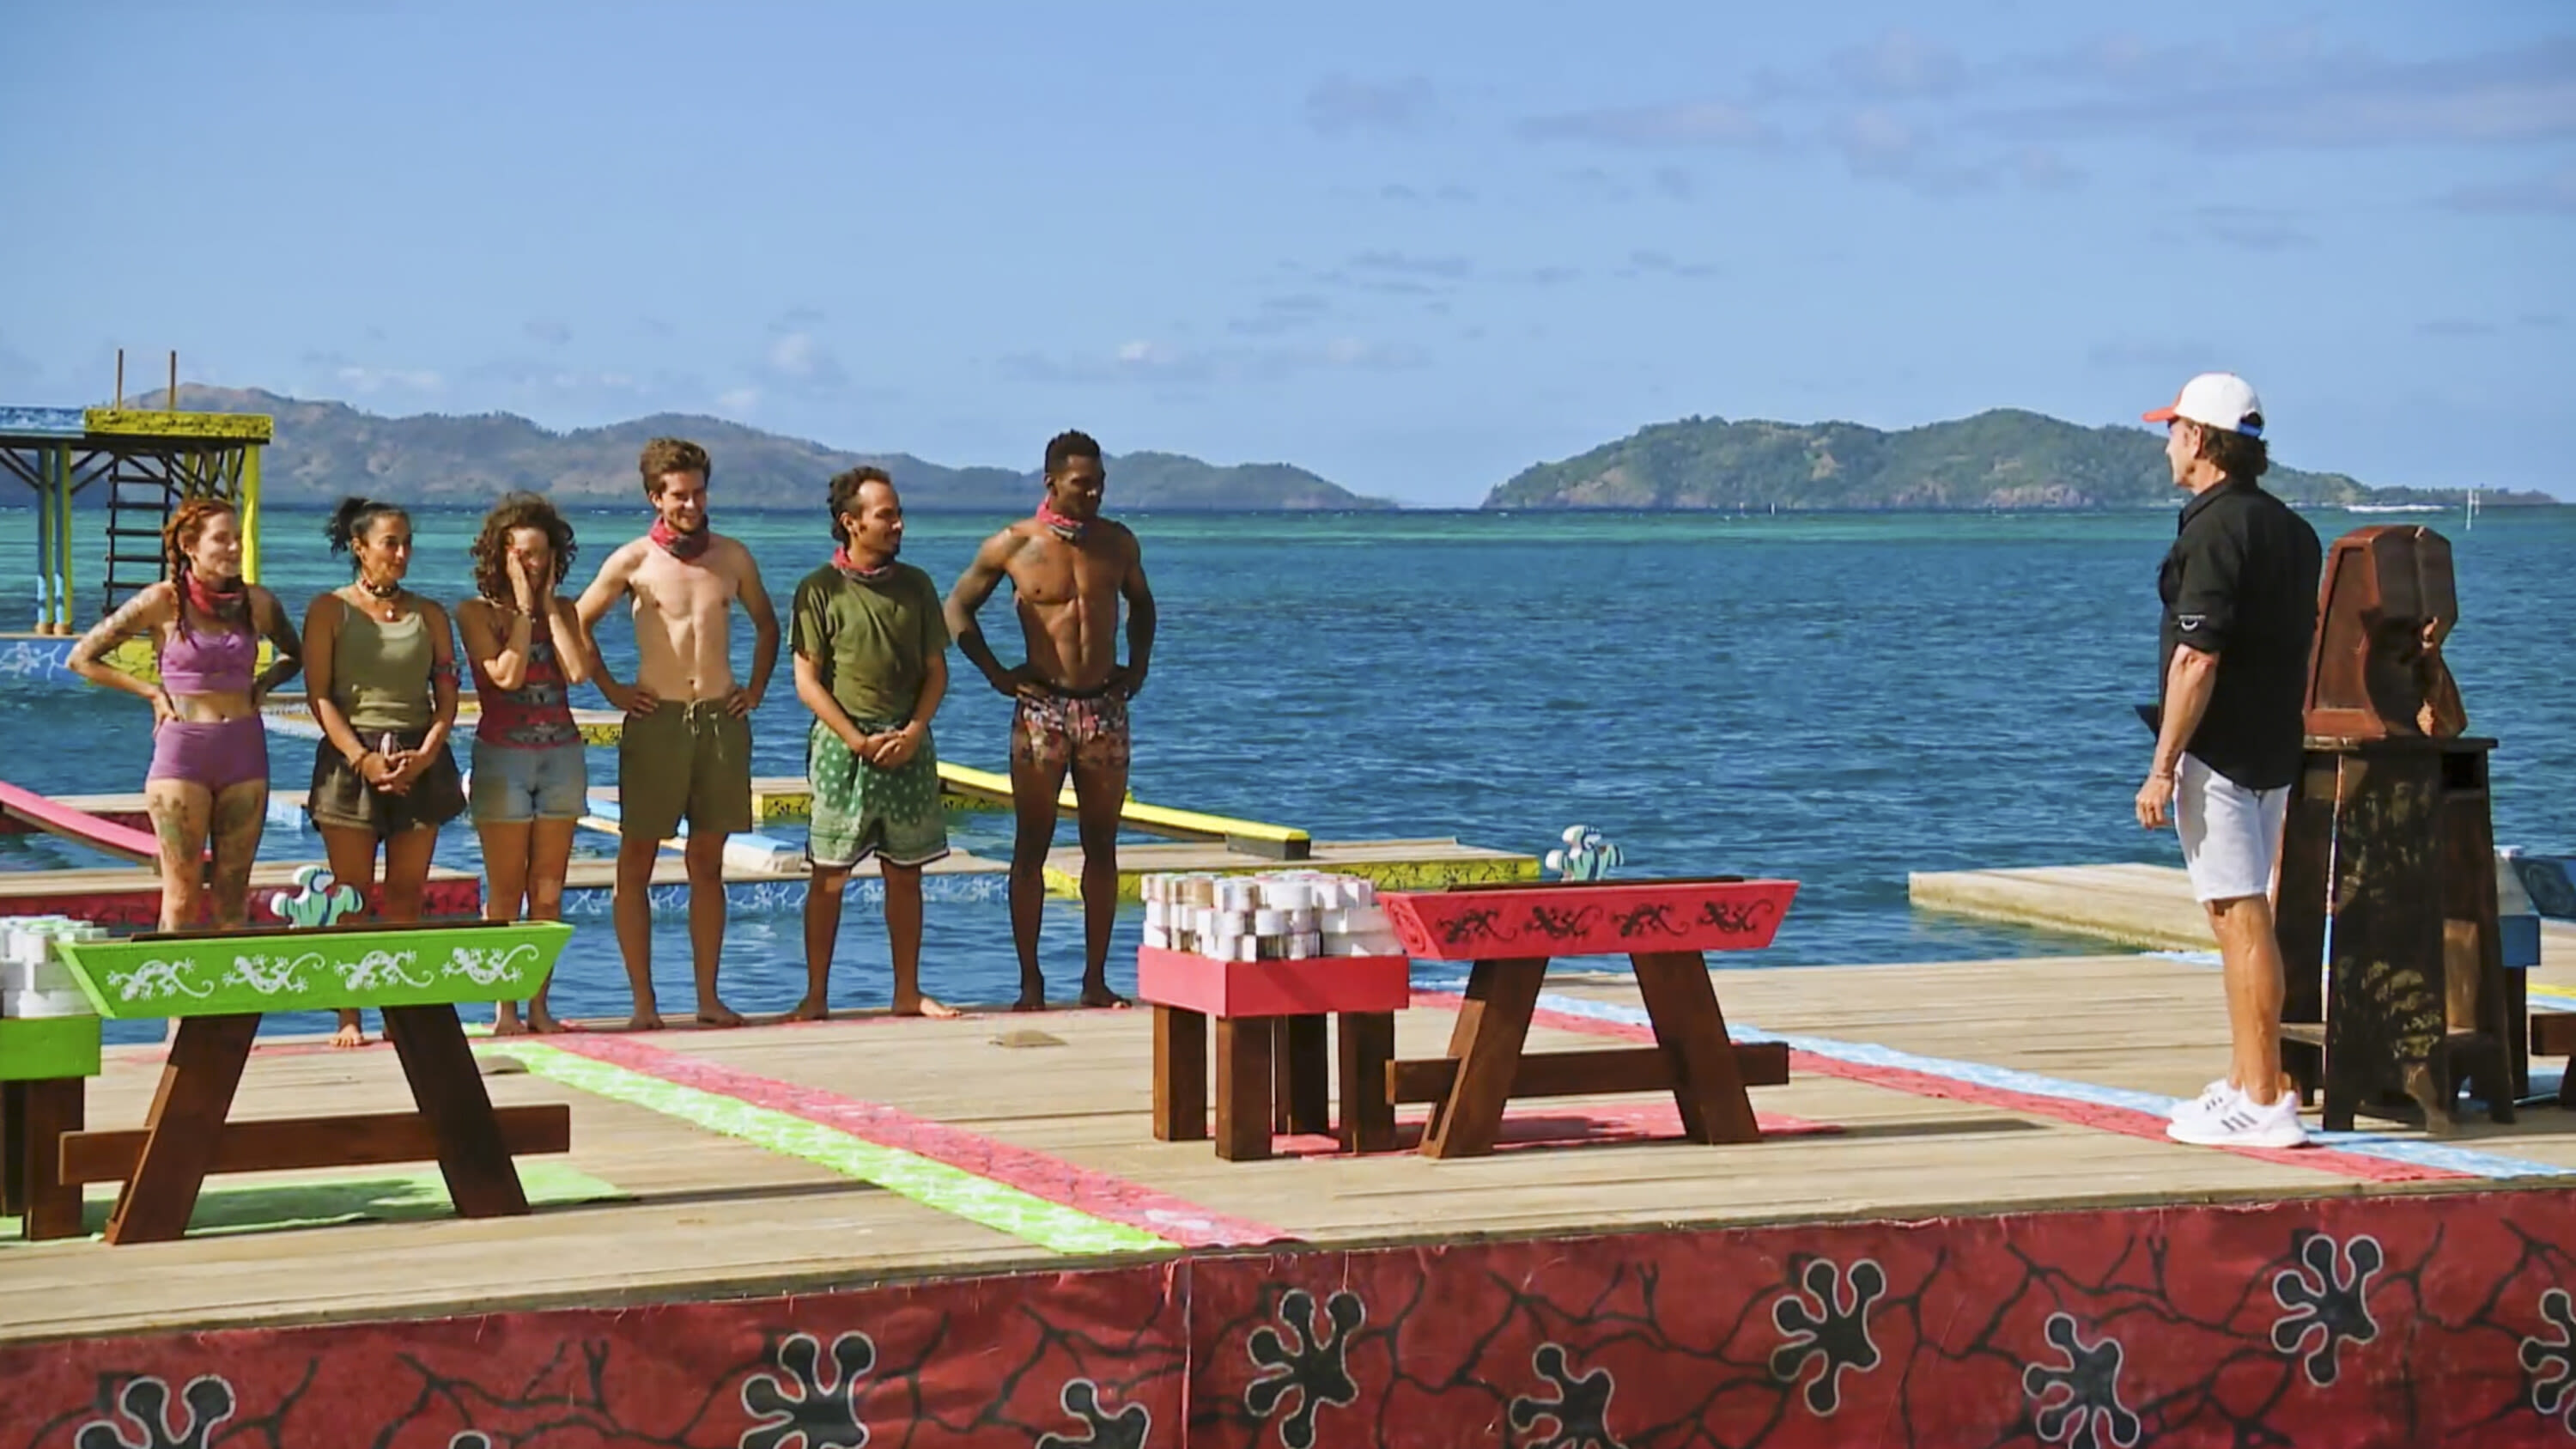 Why the New Gameplay Worked on ‘Survivor’ This Season